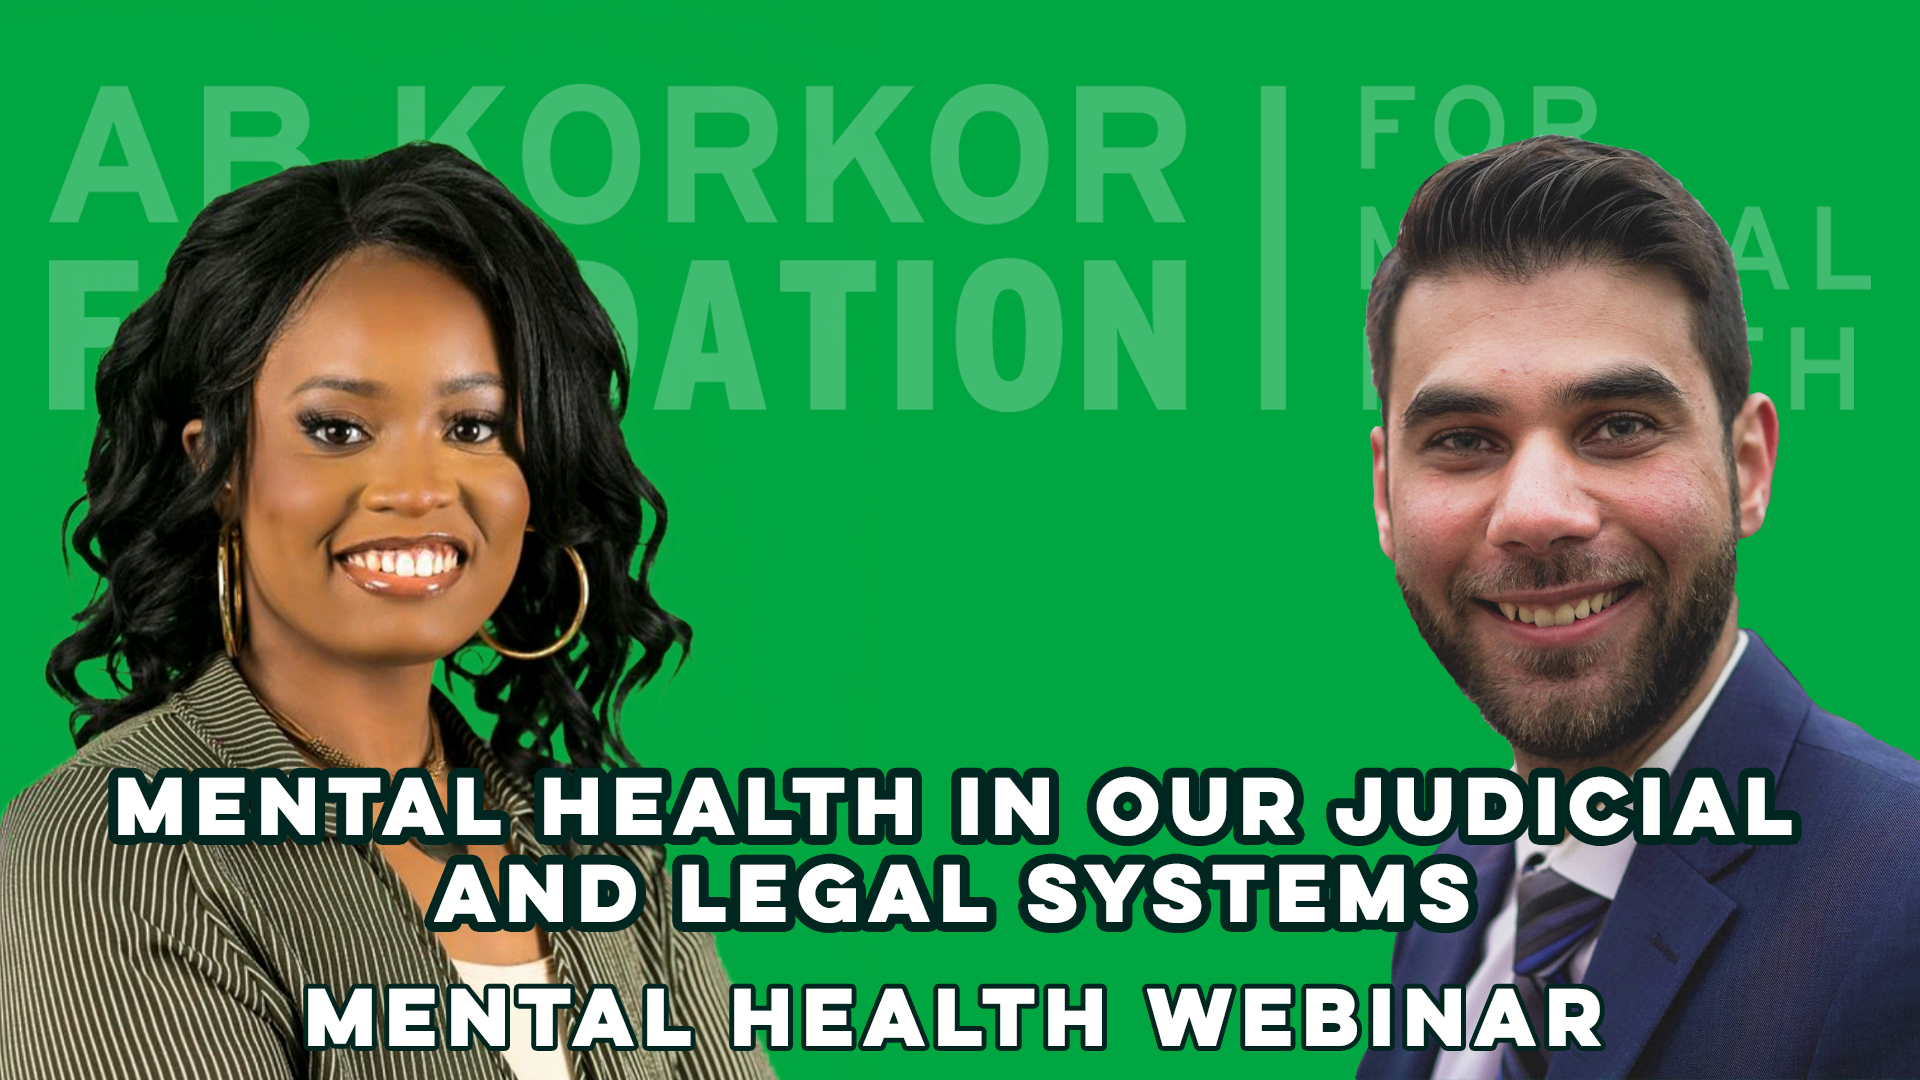 Mental Health in Our Judicial and Legal Systems - Mental Health Webinar - AB Korkor Foundation